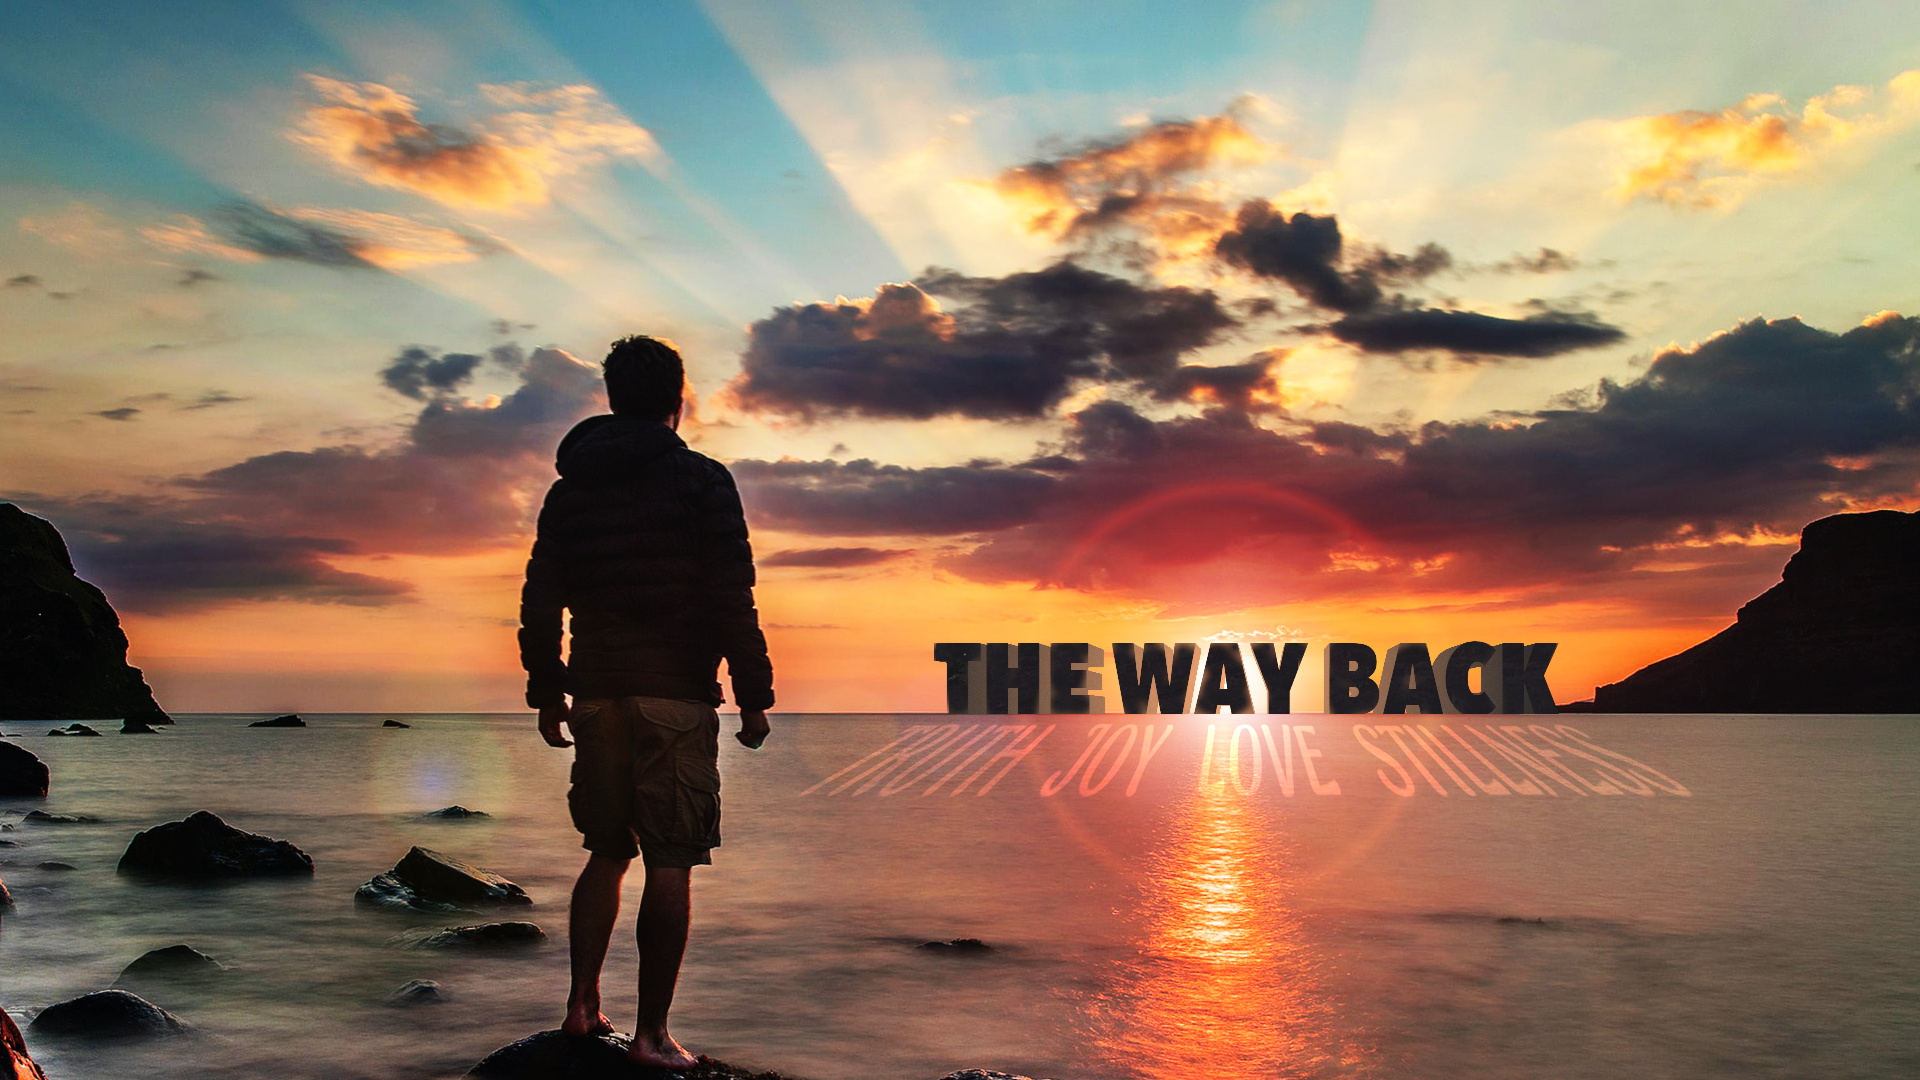 The Way Back to Love